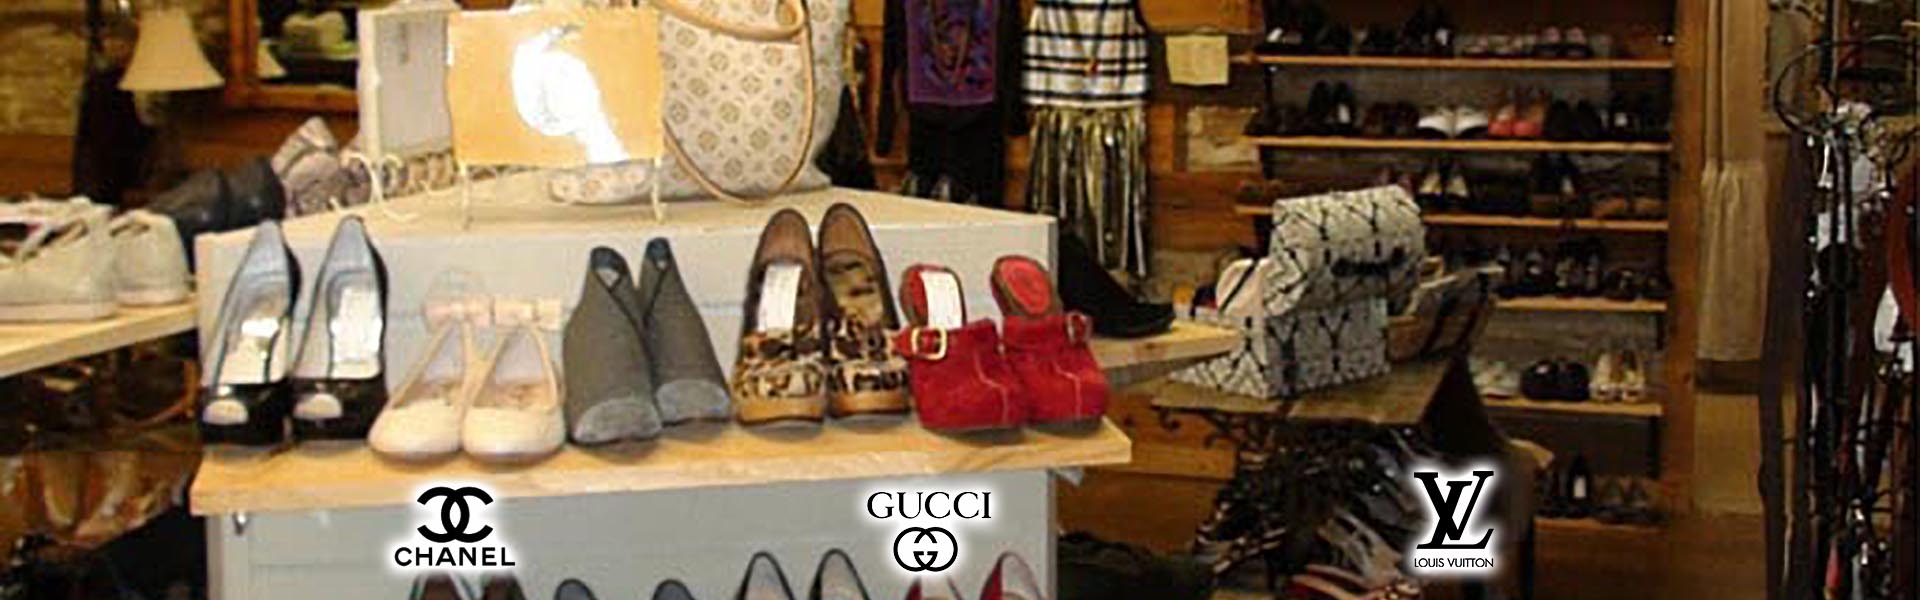 Shop Image featuring Chanel, Gucci and Louis Vitton